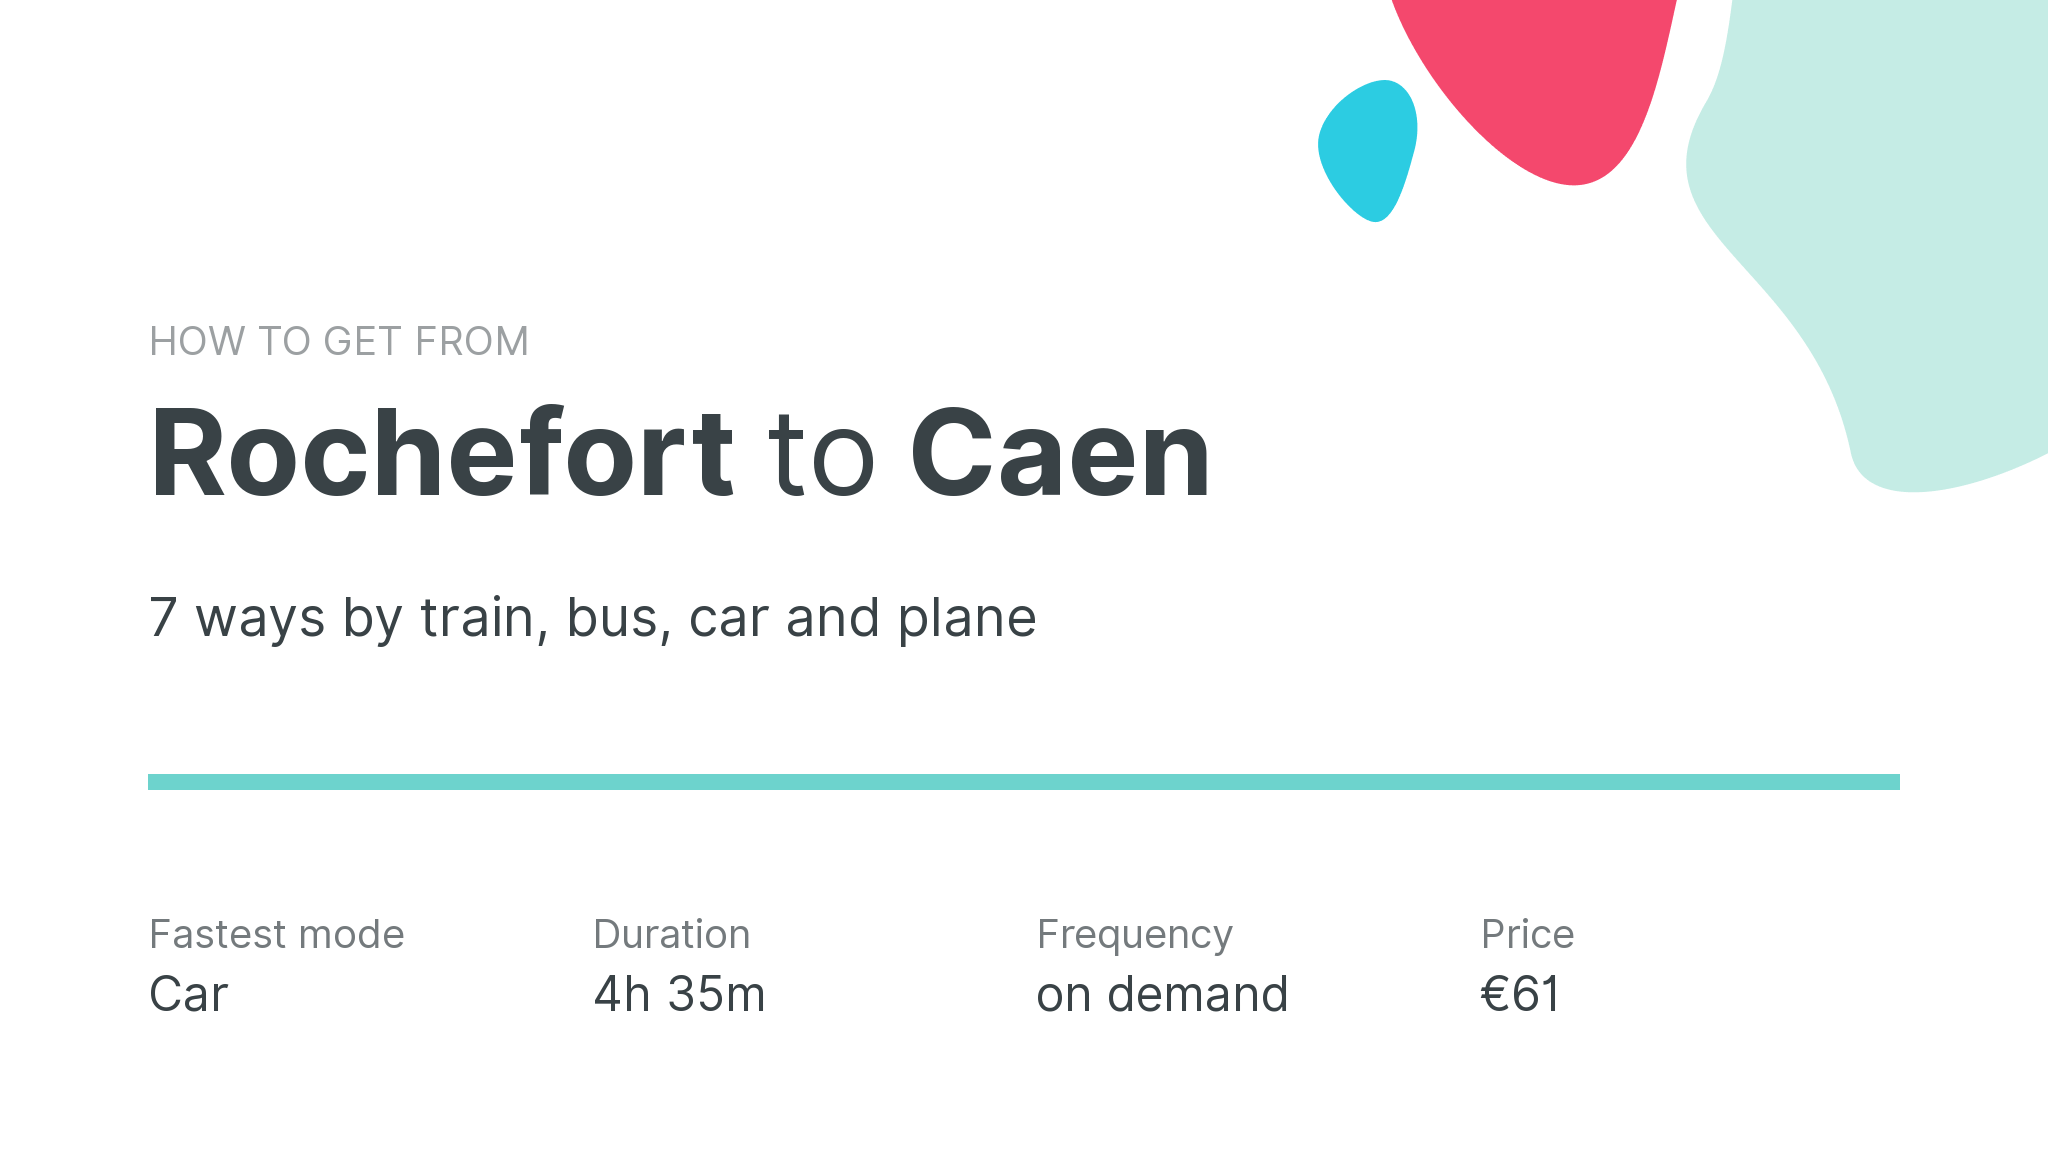 How do I get from Rochefort to Caen